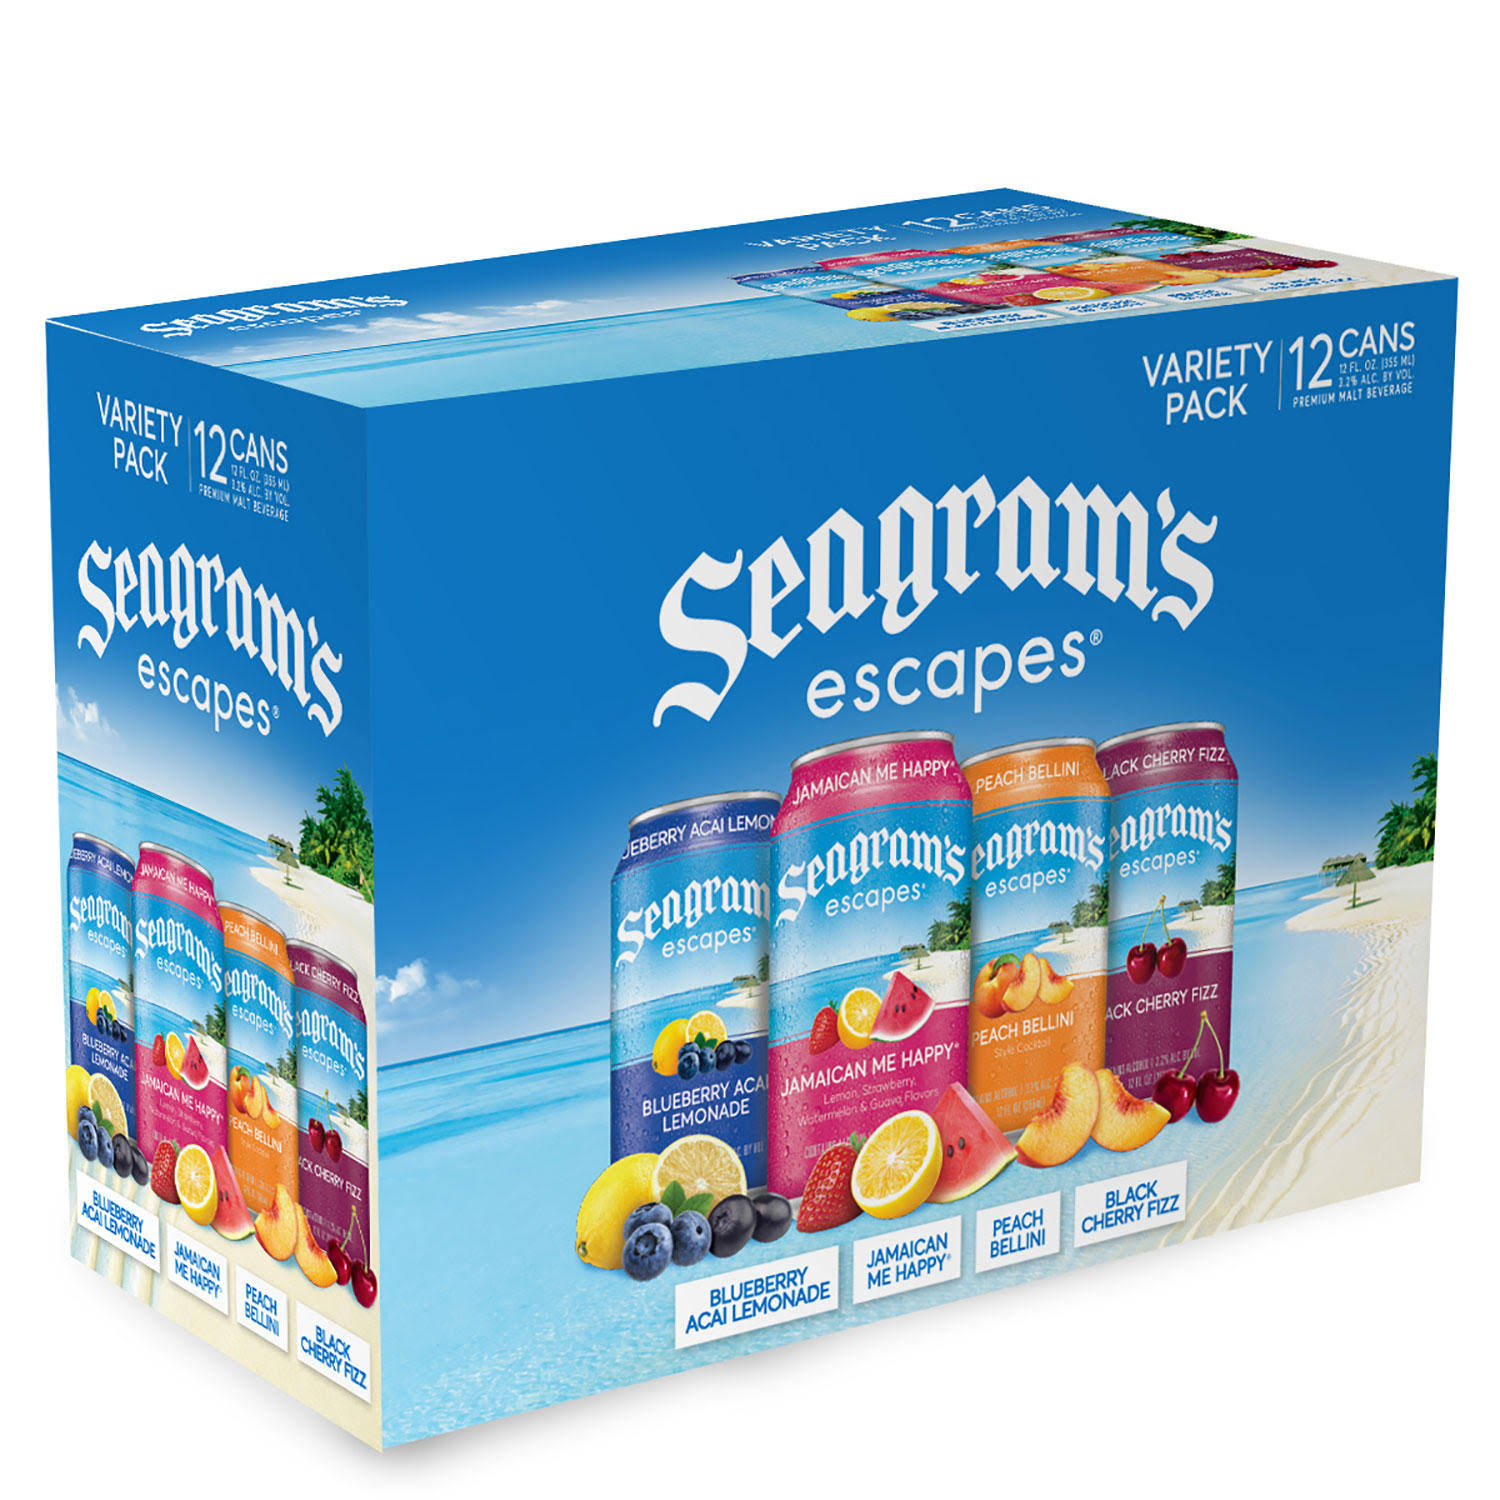 Seagram's Escapes Variety Pack - 12 x 12oz